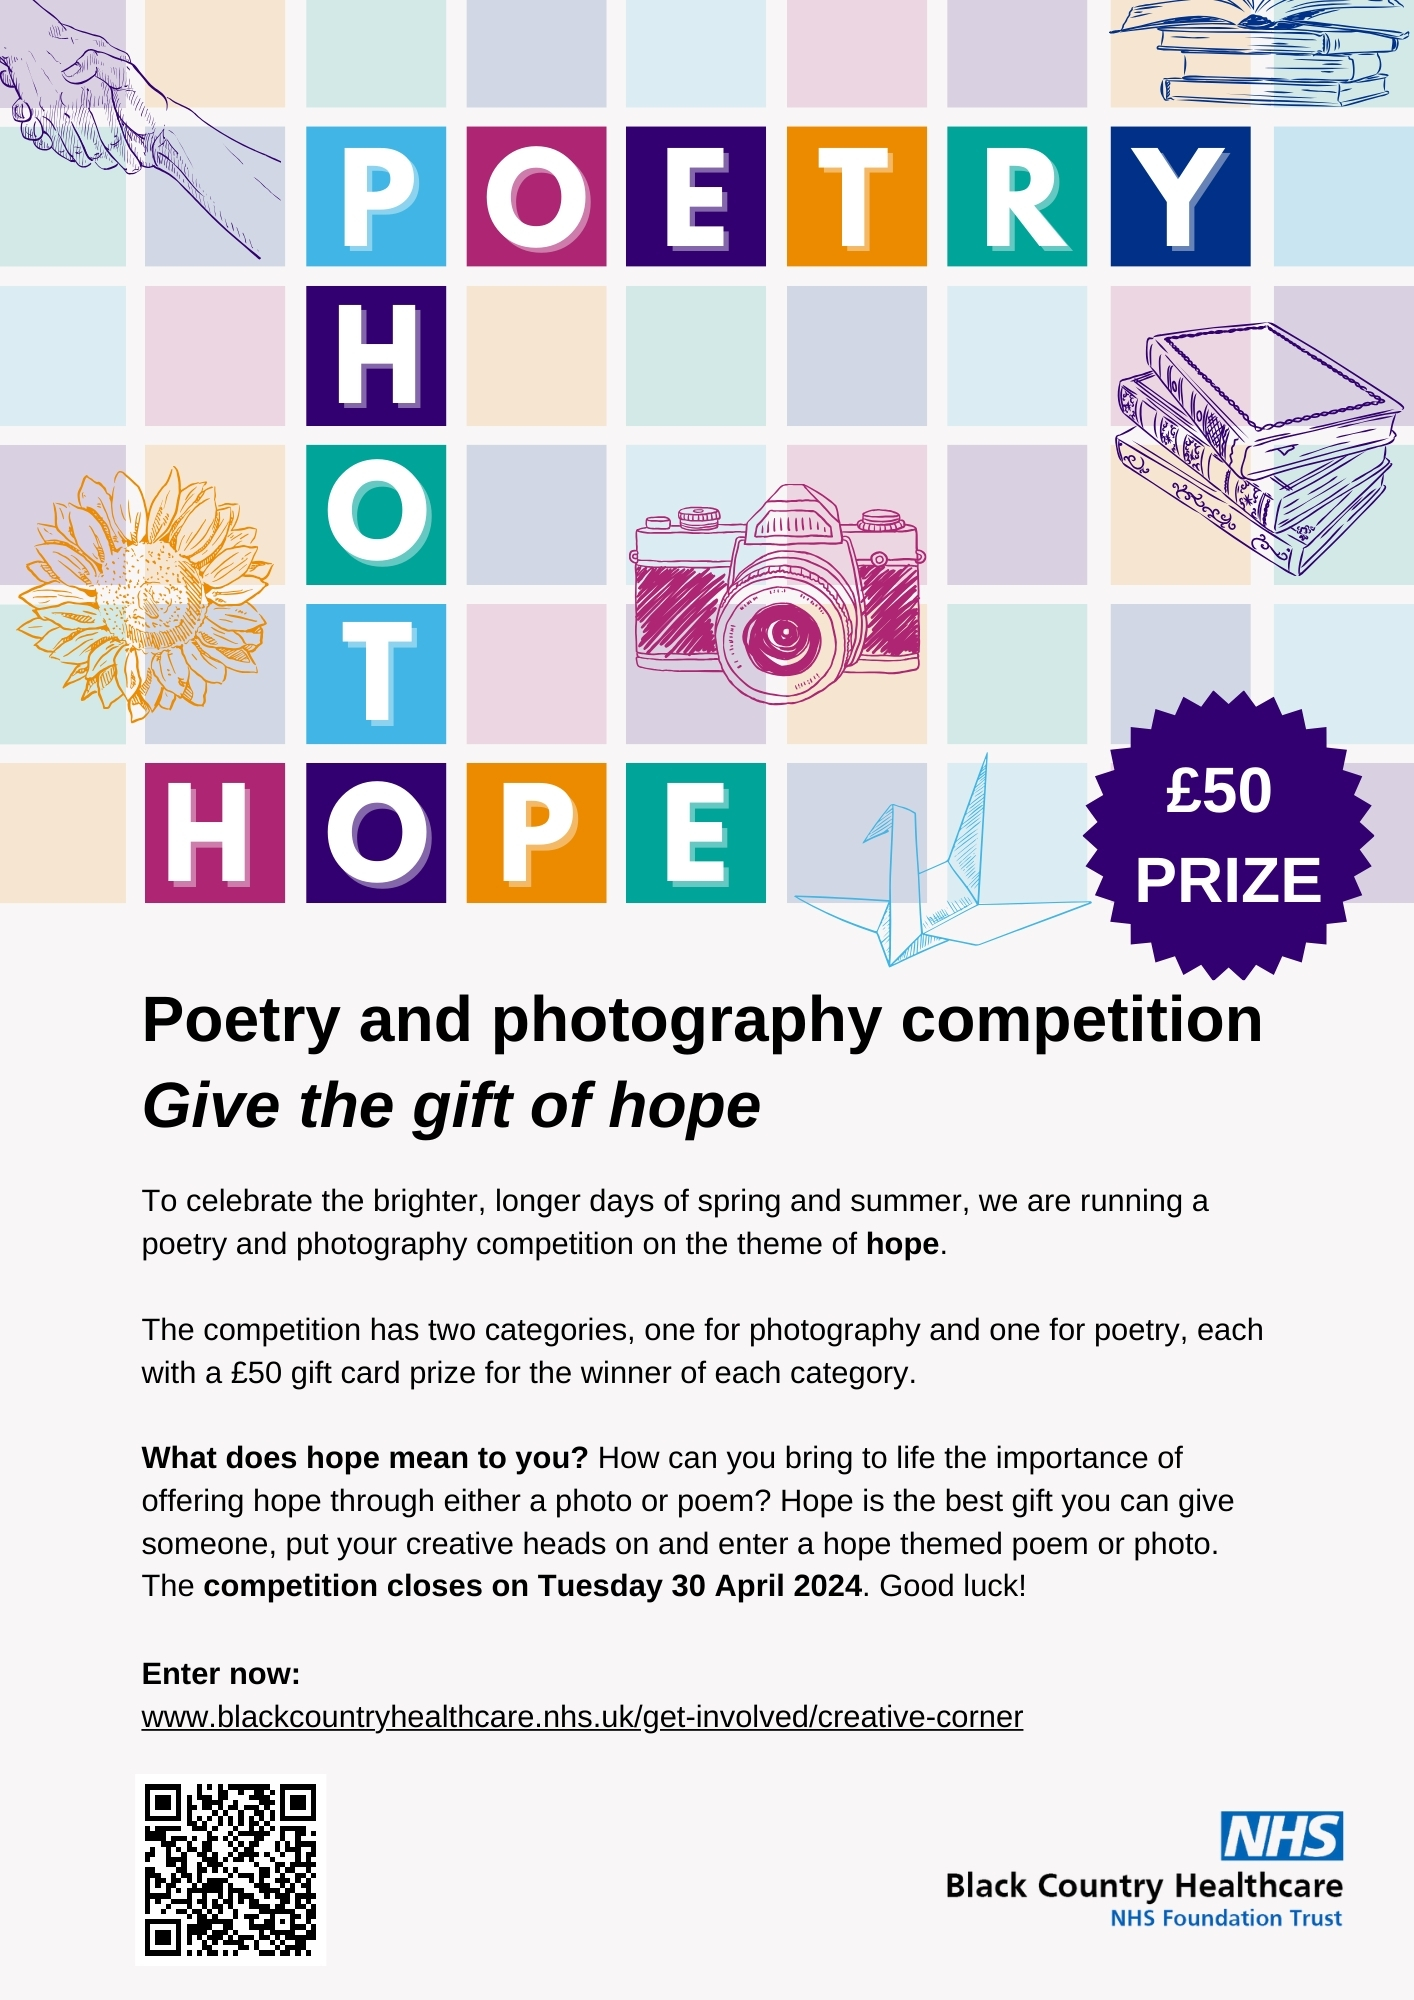 Image of poetry and photography competition poster